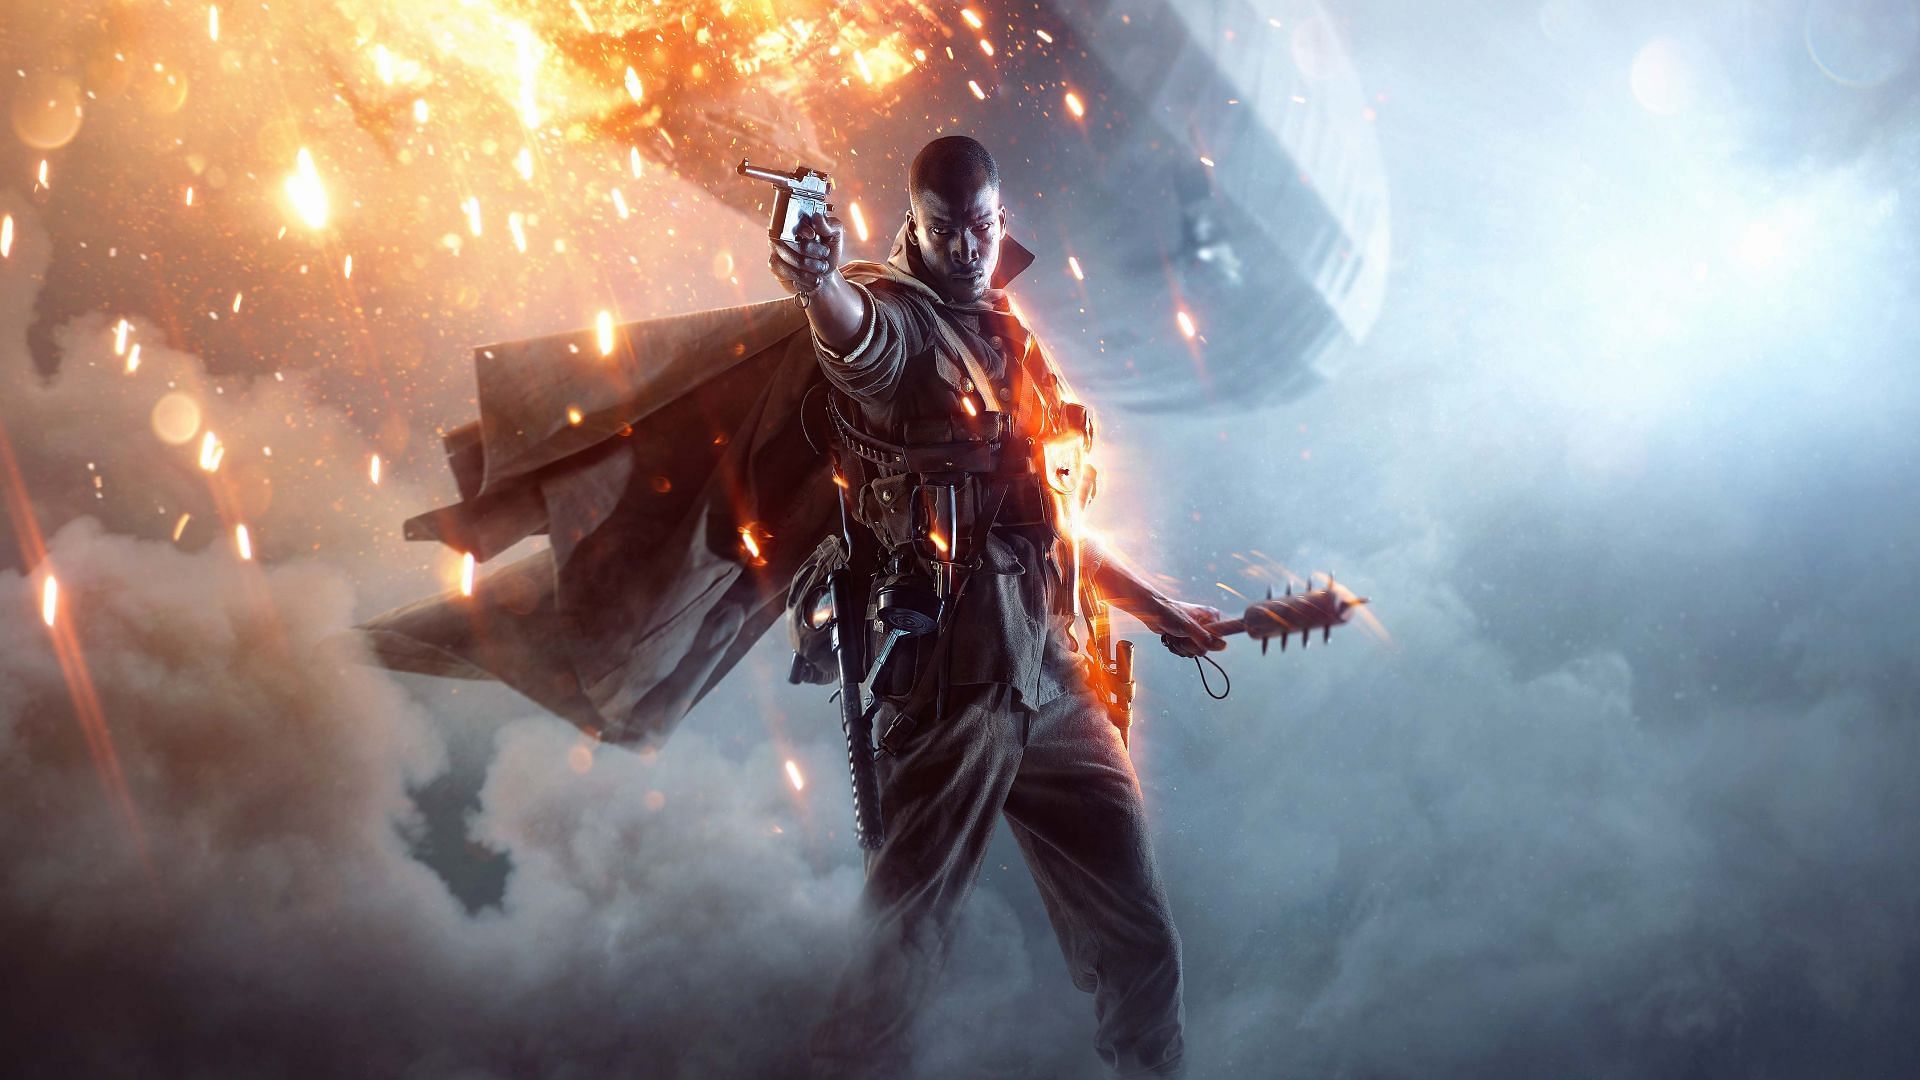 Battlefield 1 wins the category for most entertaining gameplay (Image via DICE)